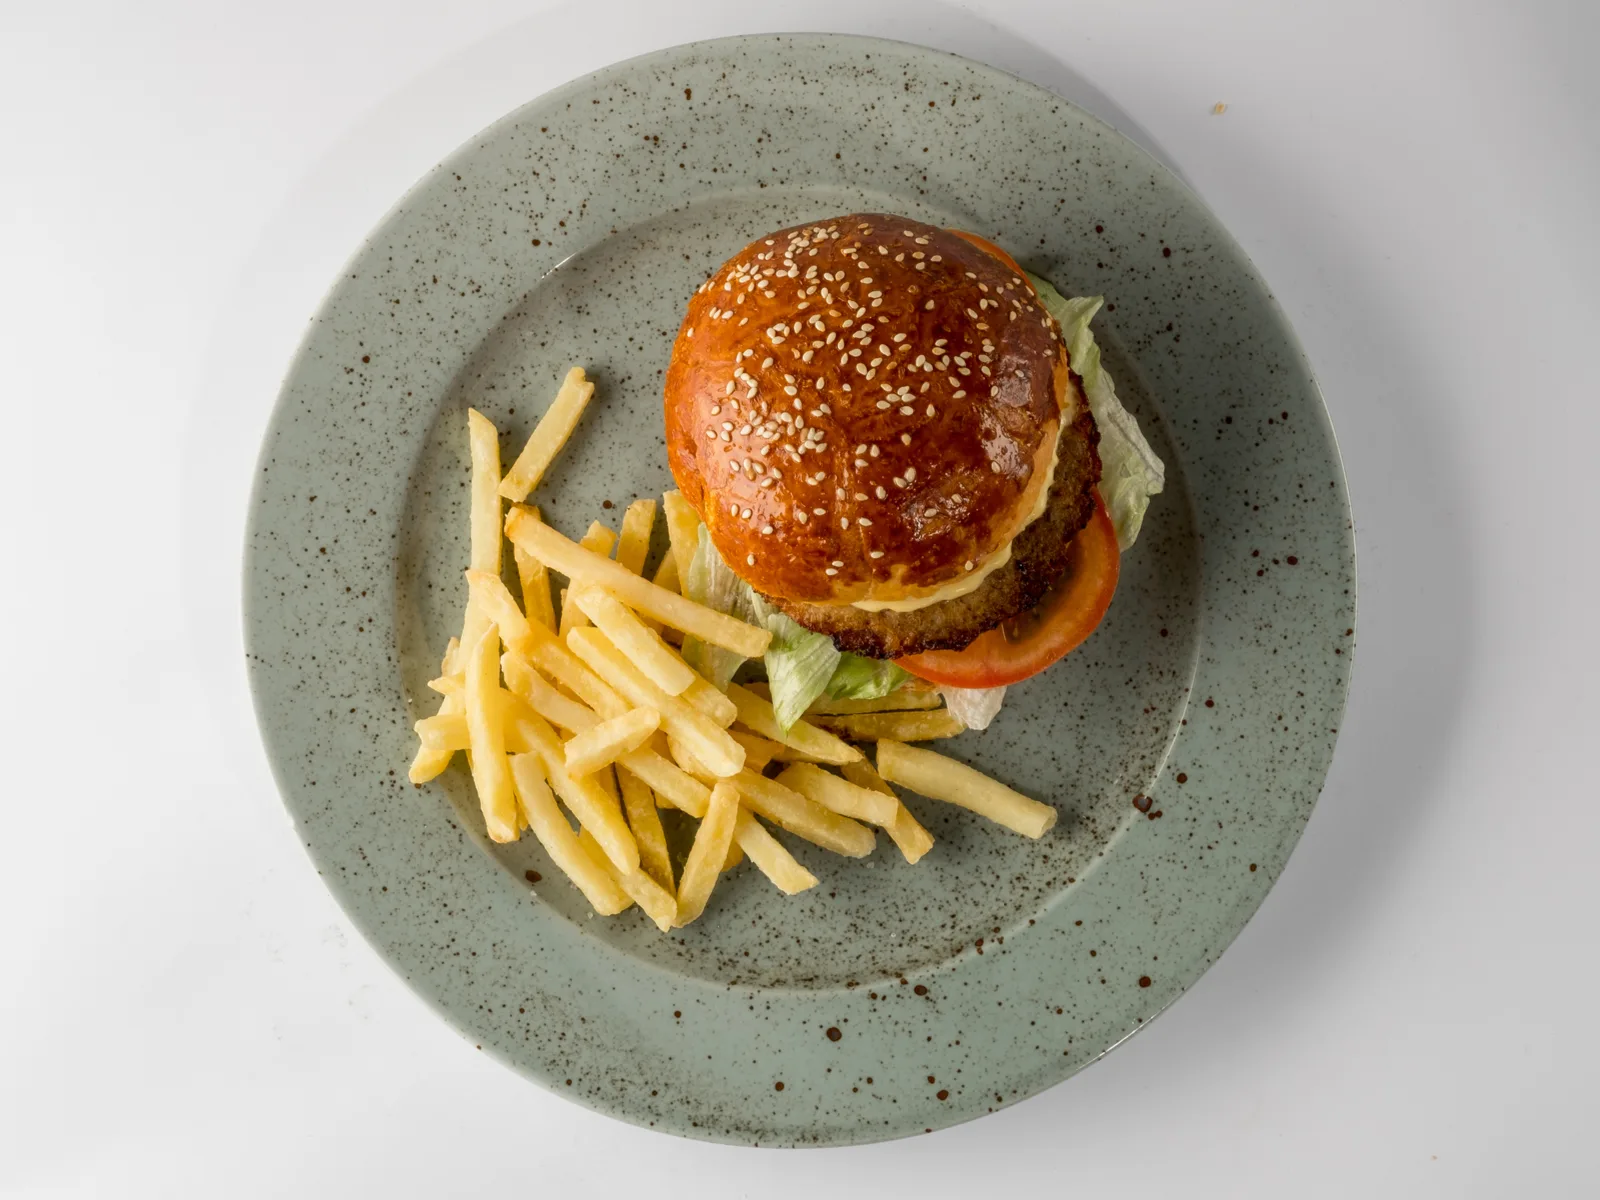 Burger and fries combination served on a grey spotted plate at one of the best restaurants in Iceland, Bautinn